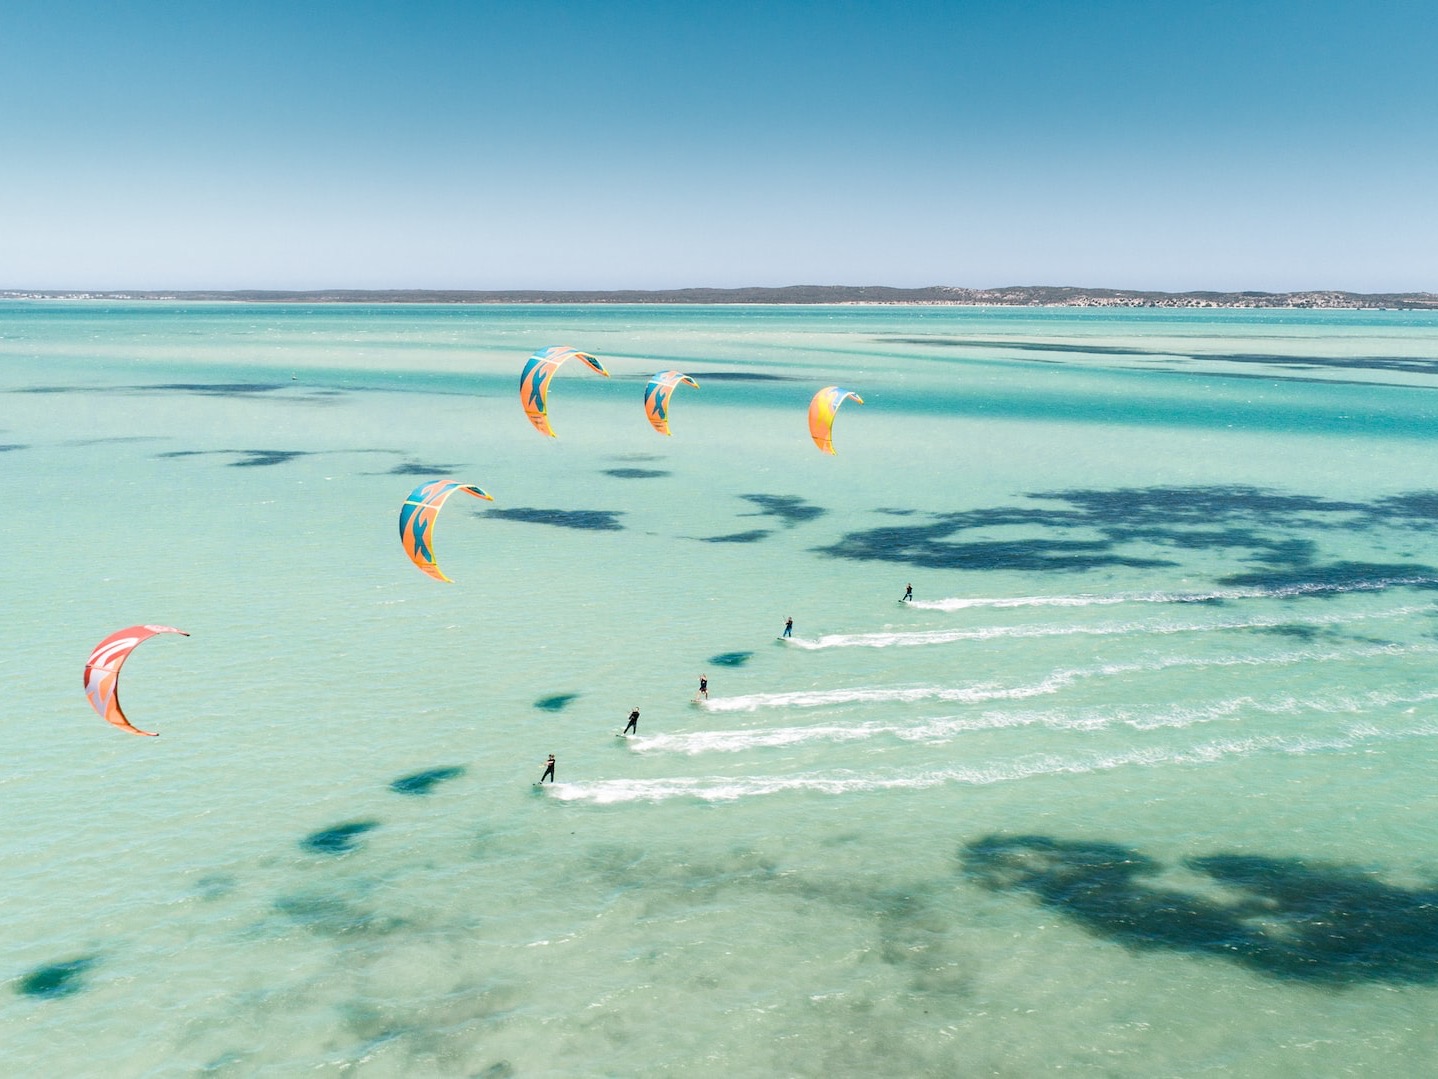 five people paragliding at the sea during daytime